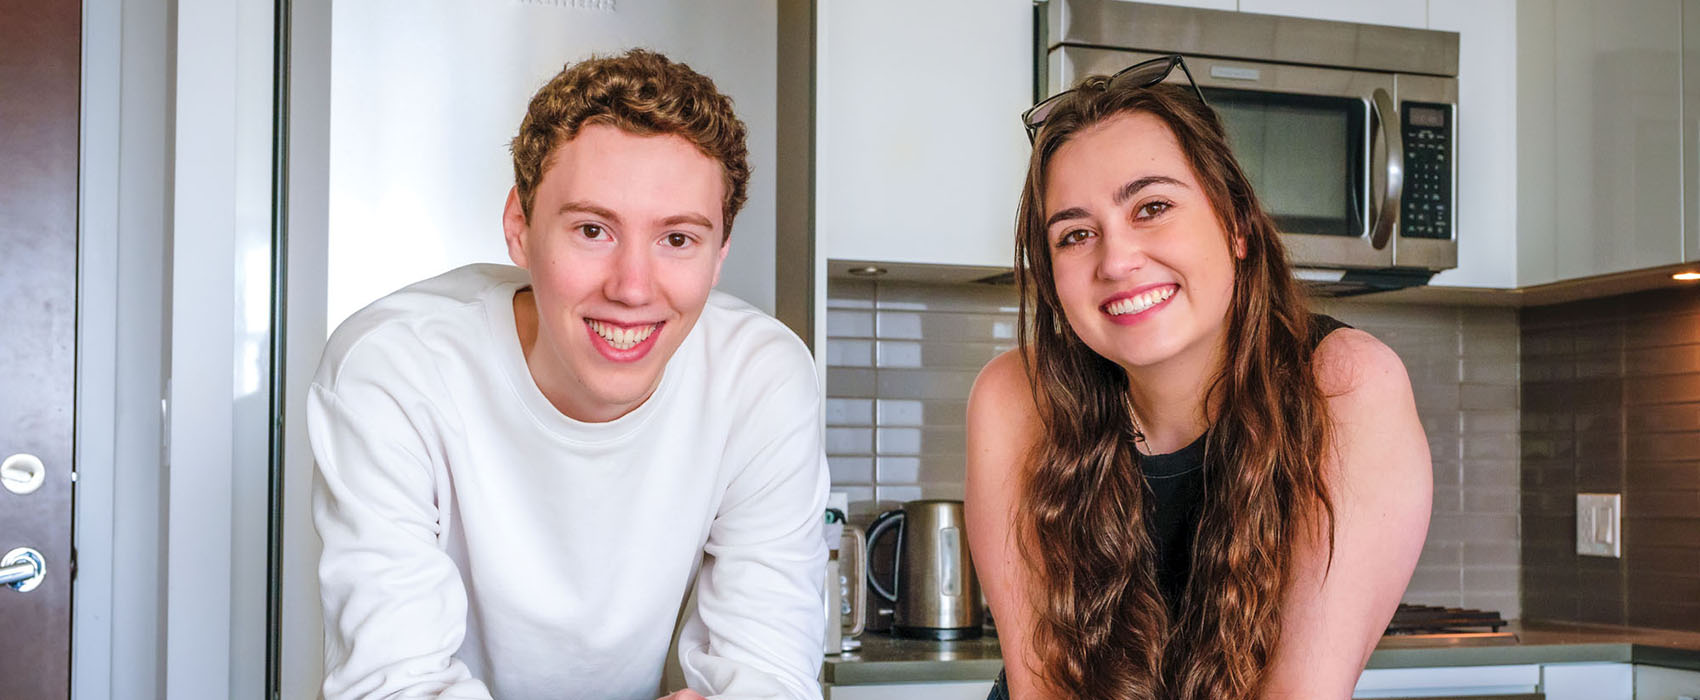 Friends Keaton Lawlor and Cassidy Cooper lean on their kitchen countertop